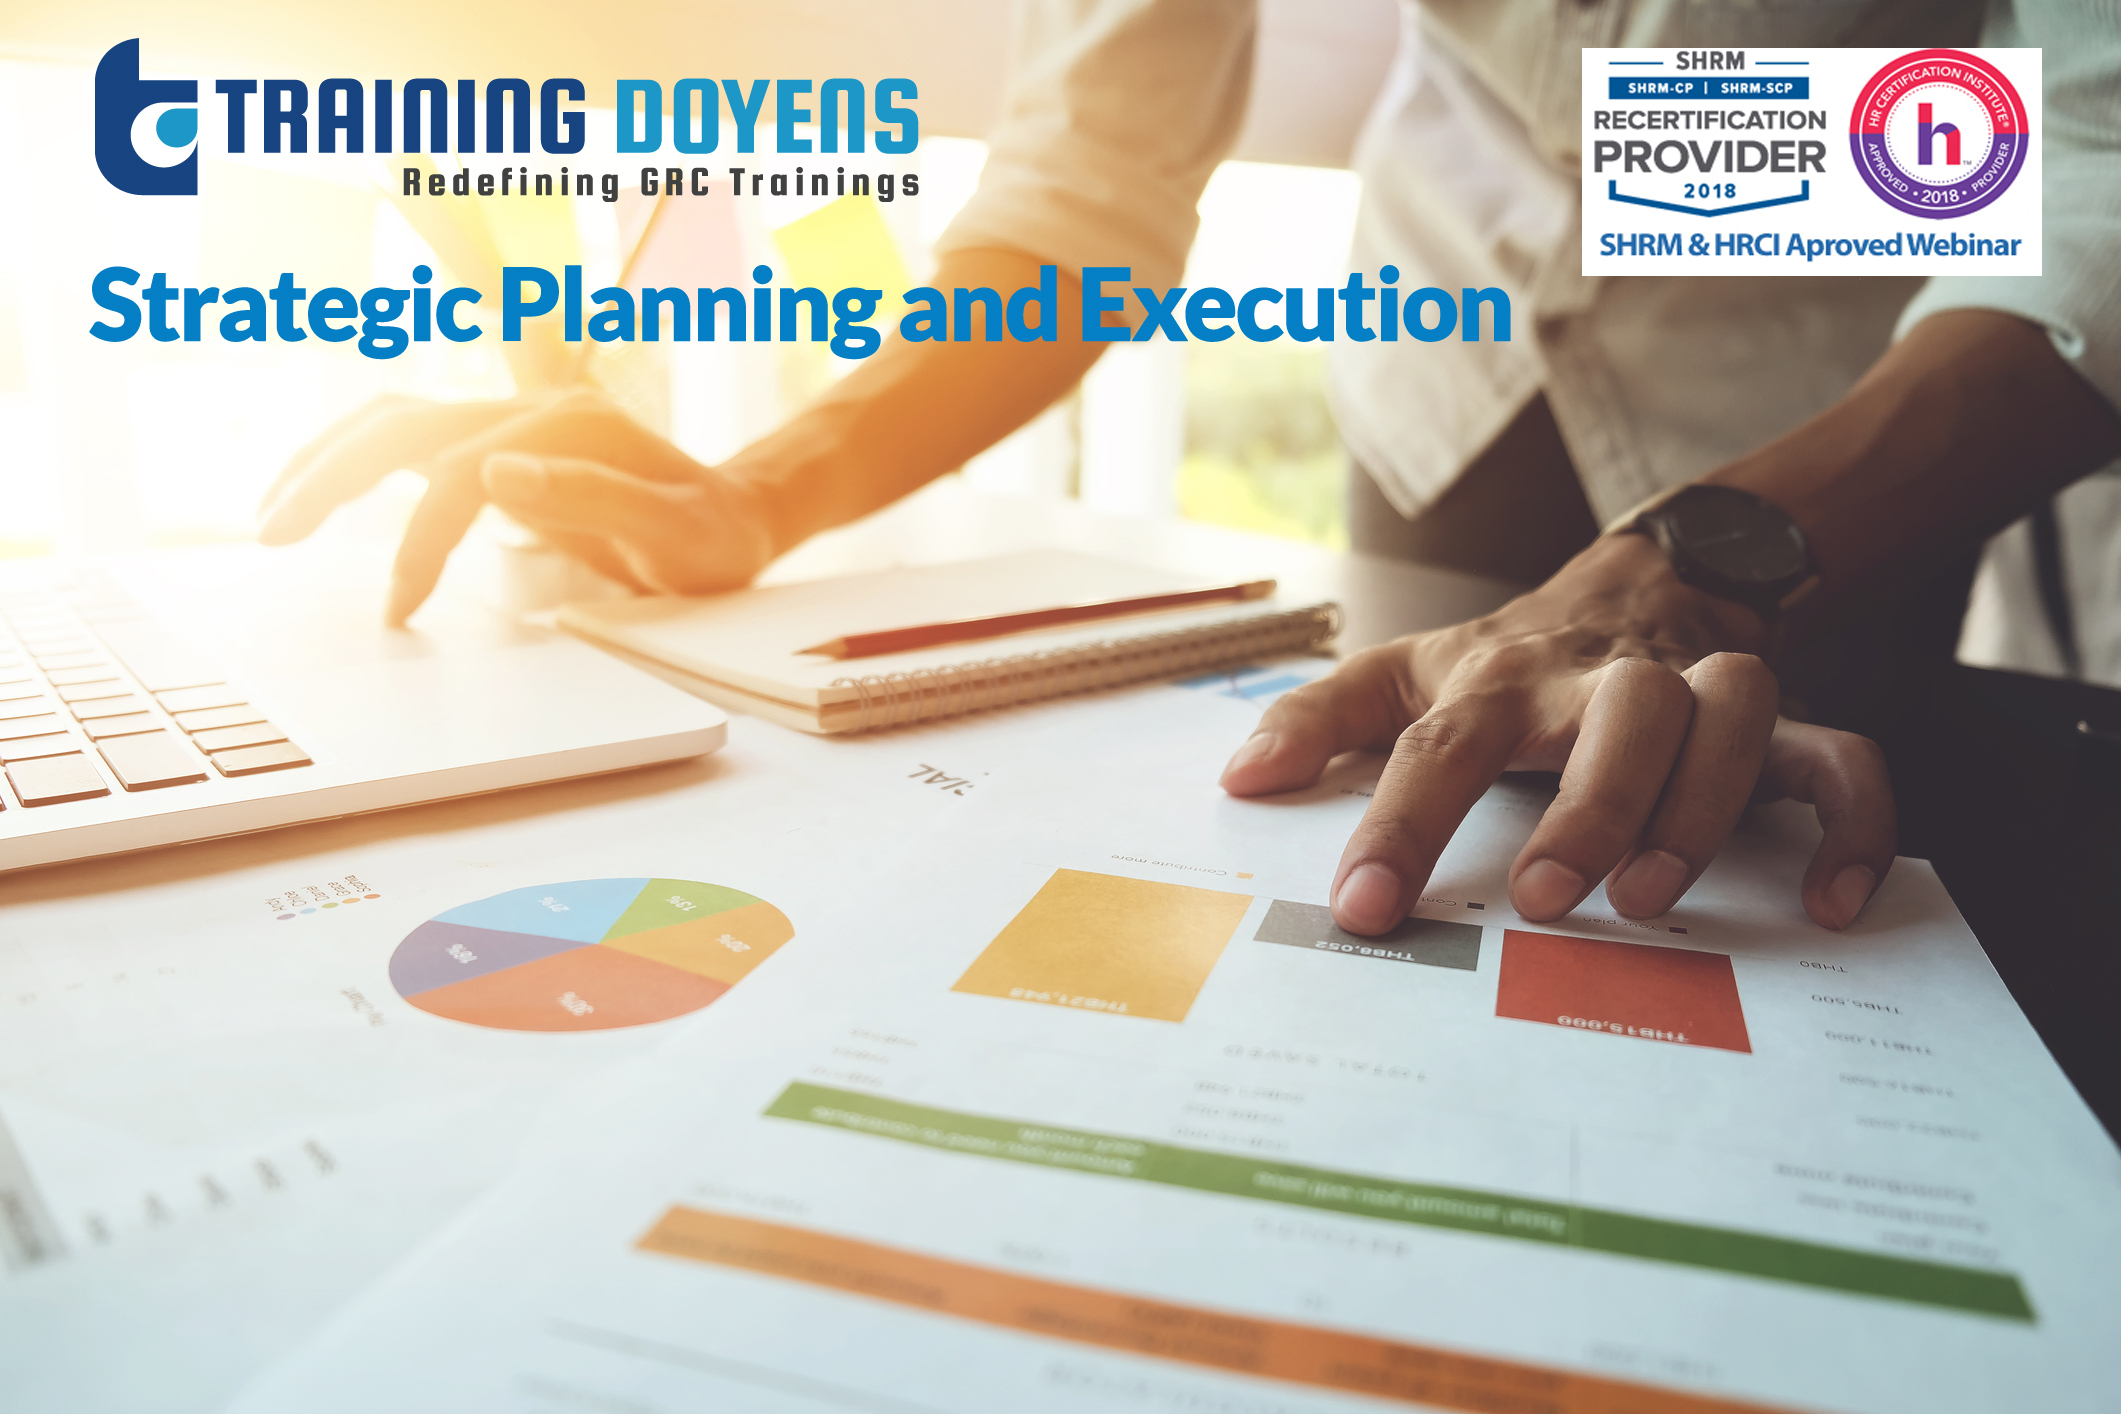 Webinar on Strategic Planning and Execution: The 1-2-3 Year Plan for Enterprise Success and Organizational Benefit – Training Doyens, Denver, Colorado, United States